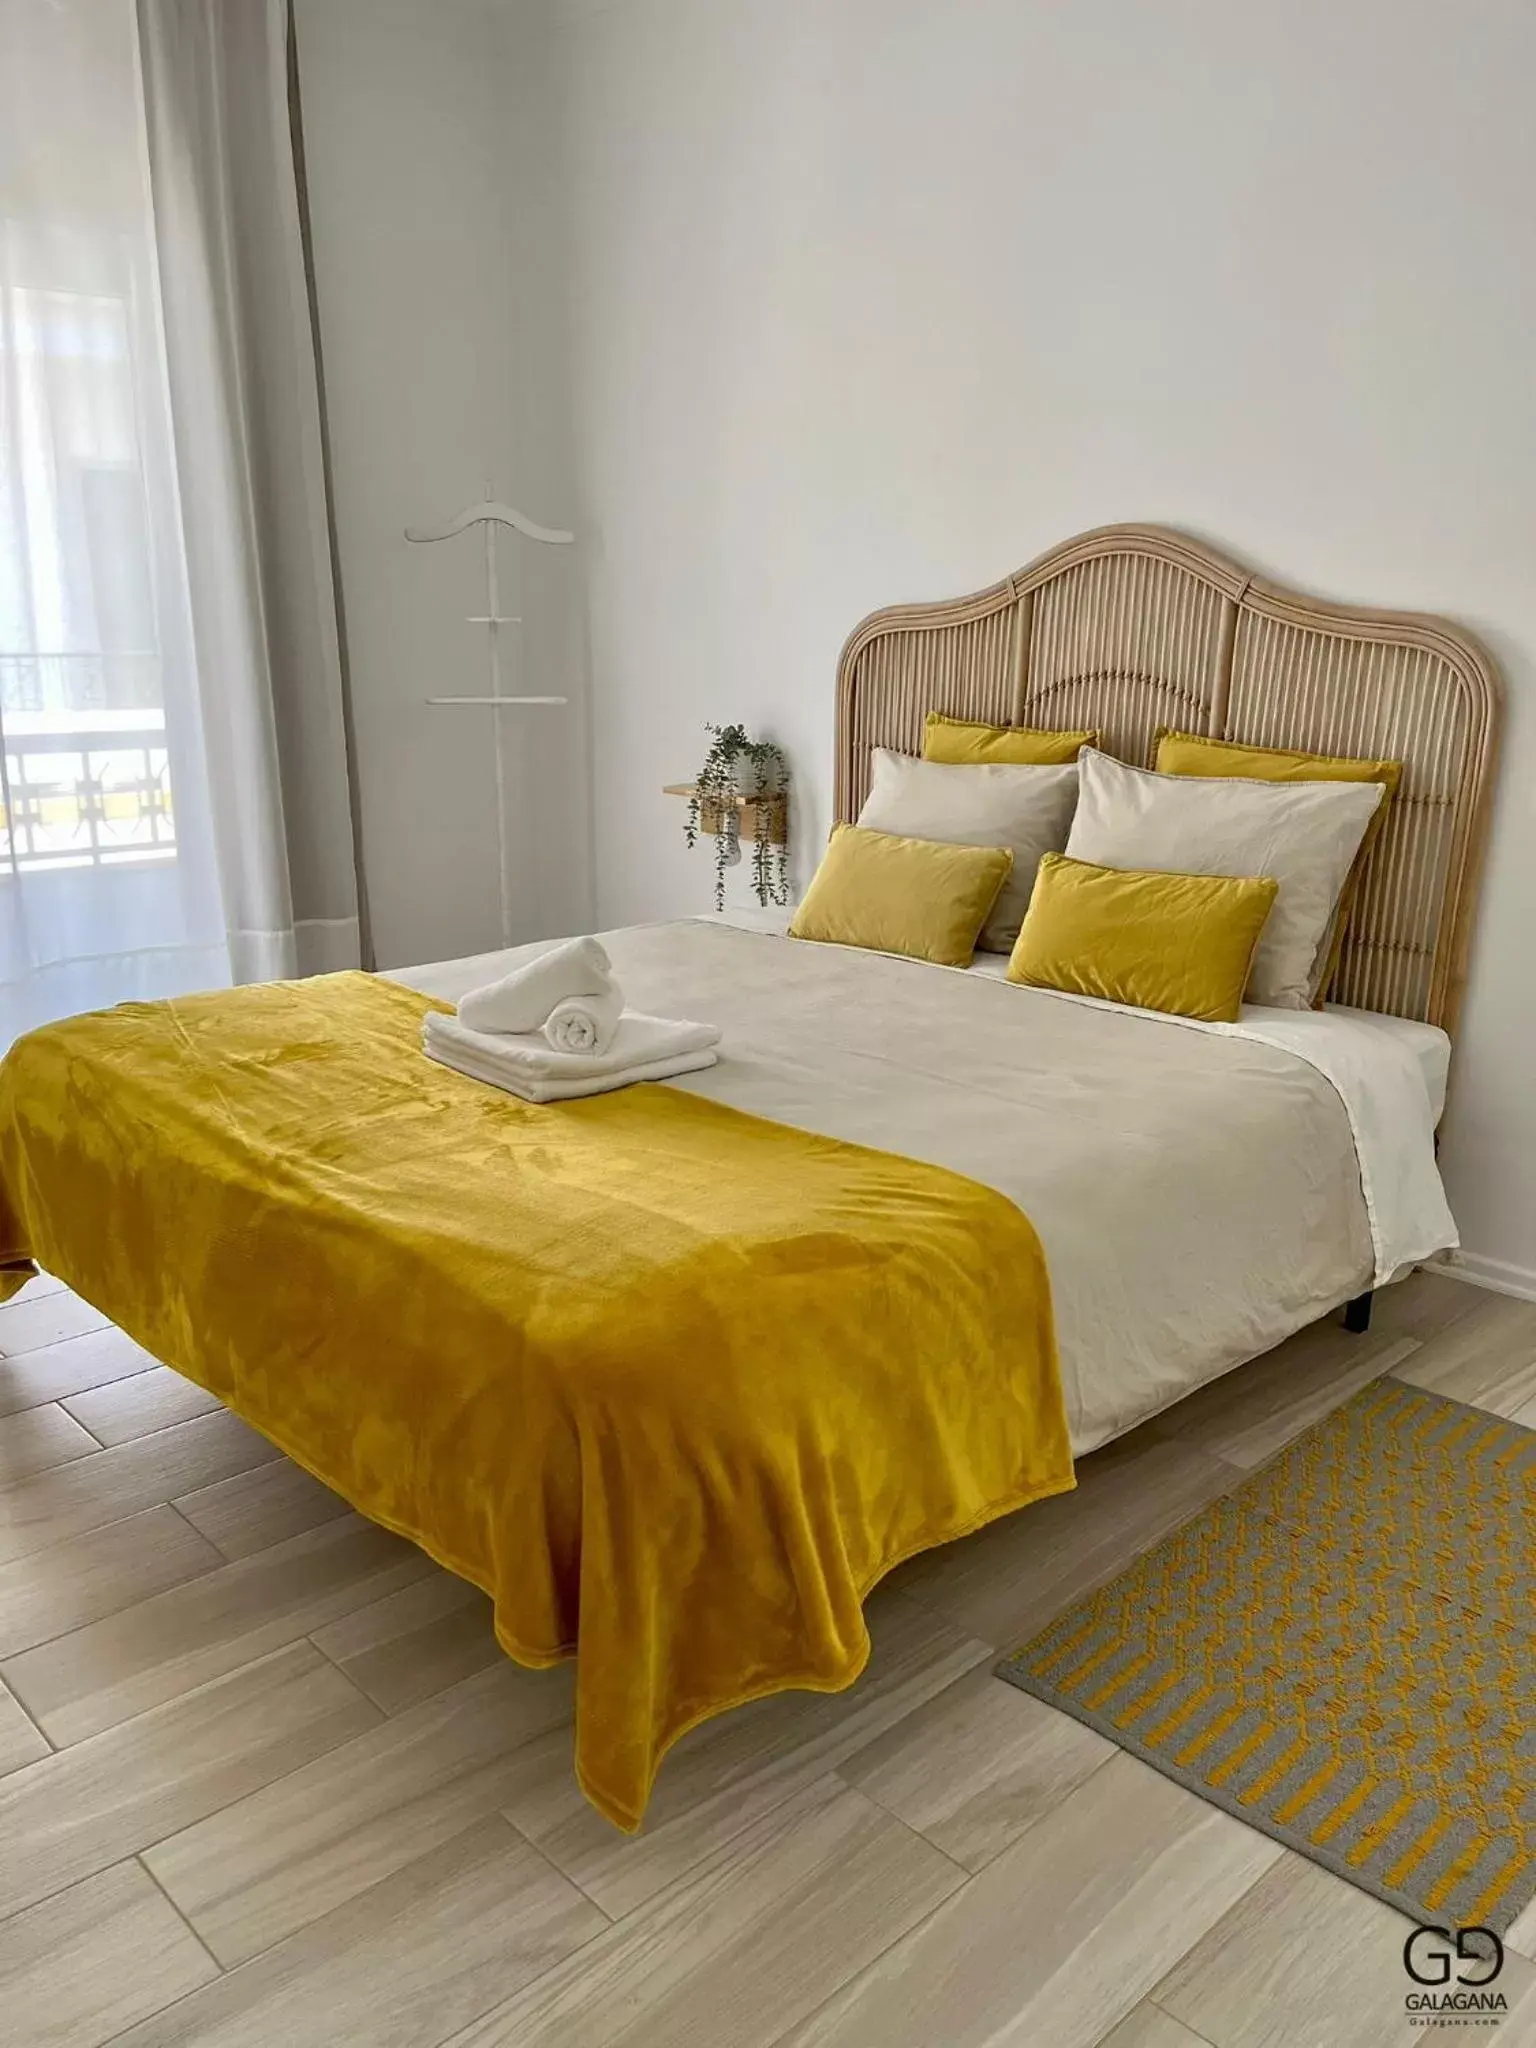 Bed in Galagana Charm House